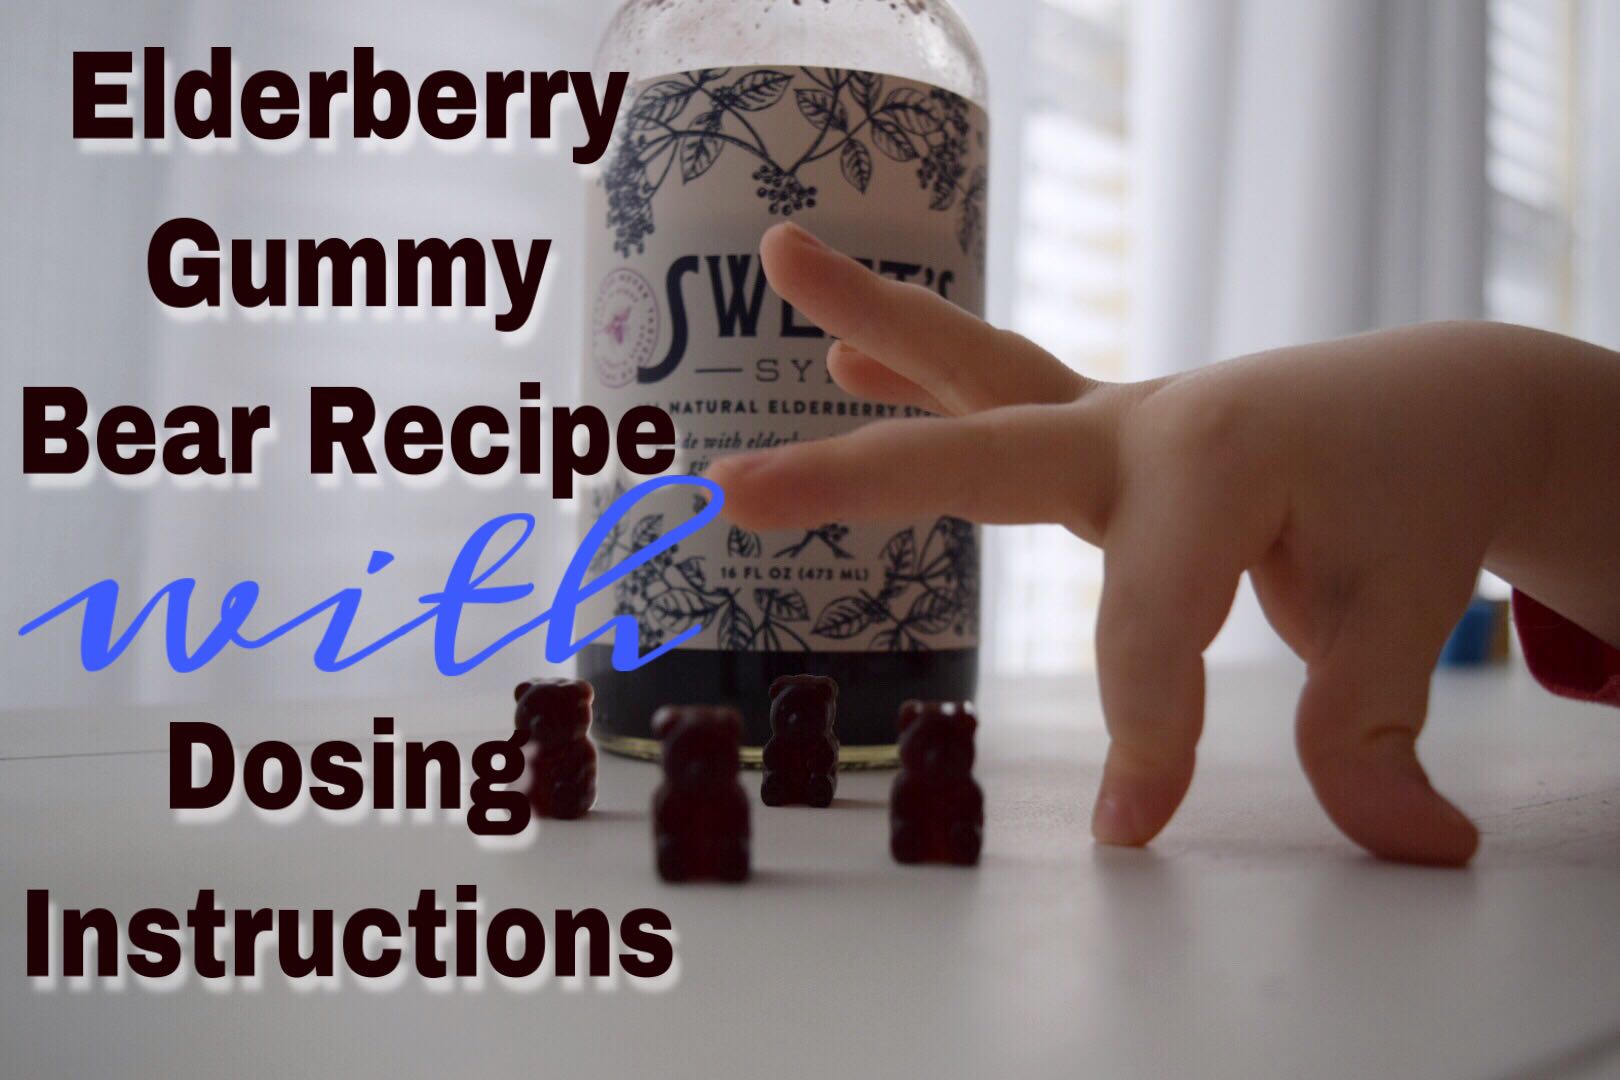 Elderberry Syrup Gummy Bears Your Kids Will Love